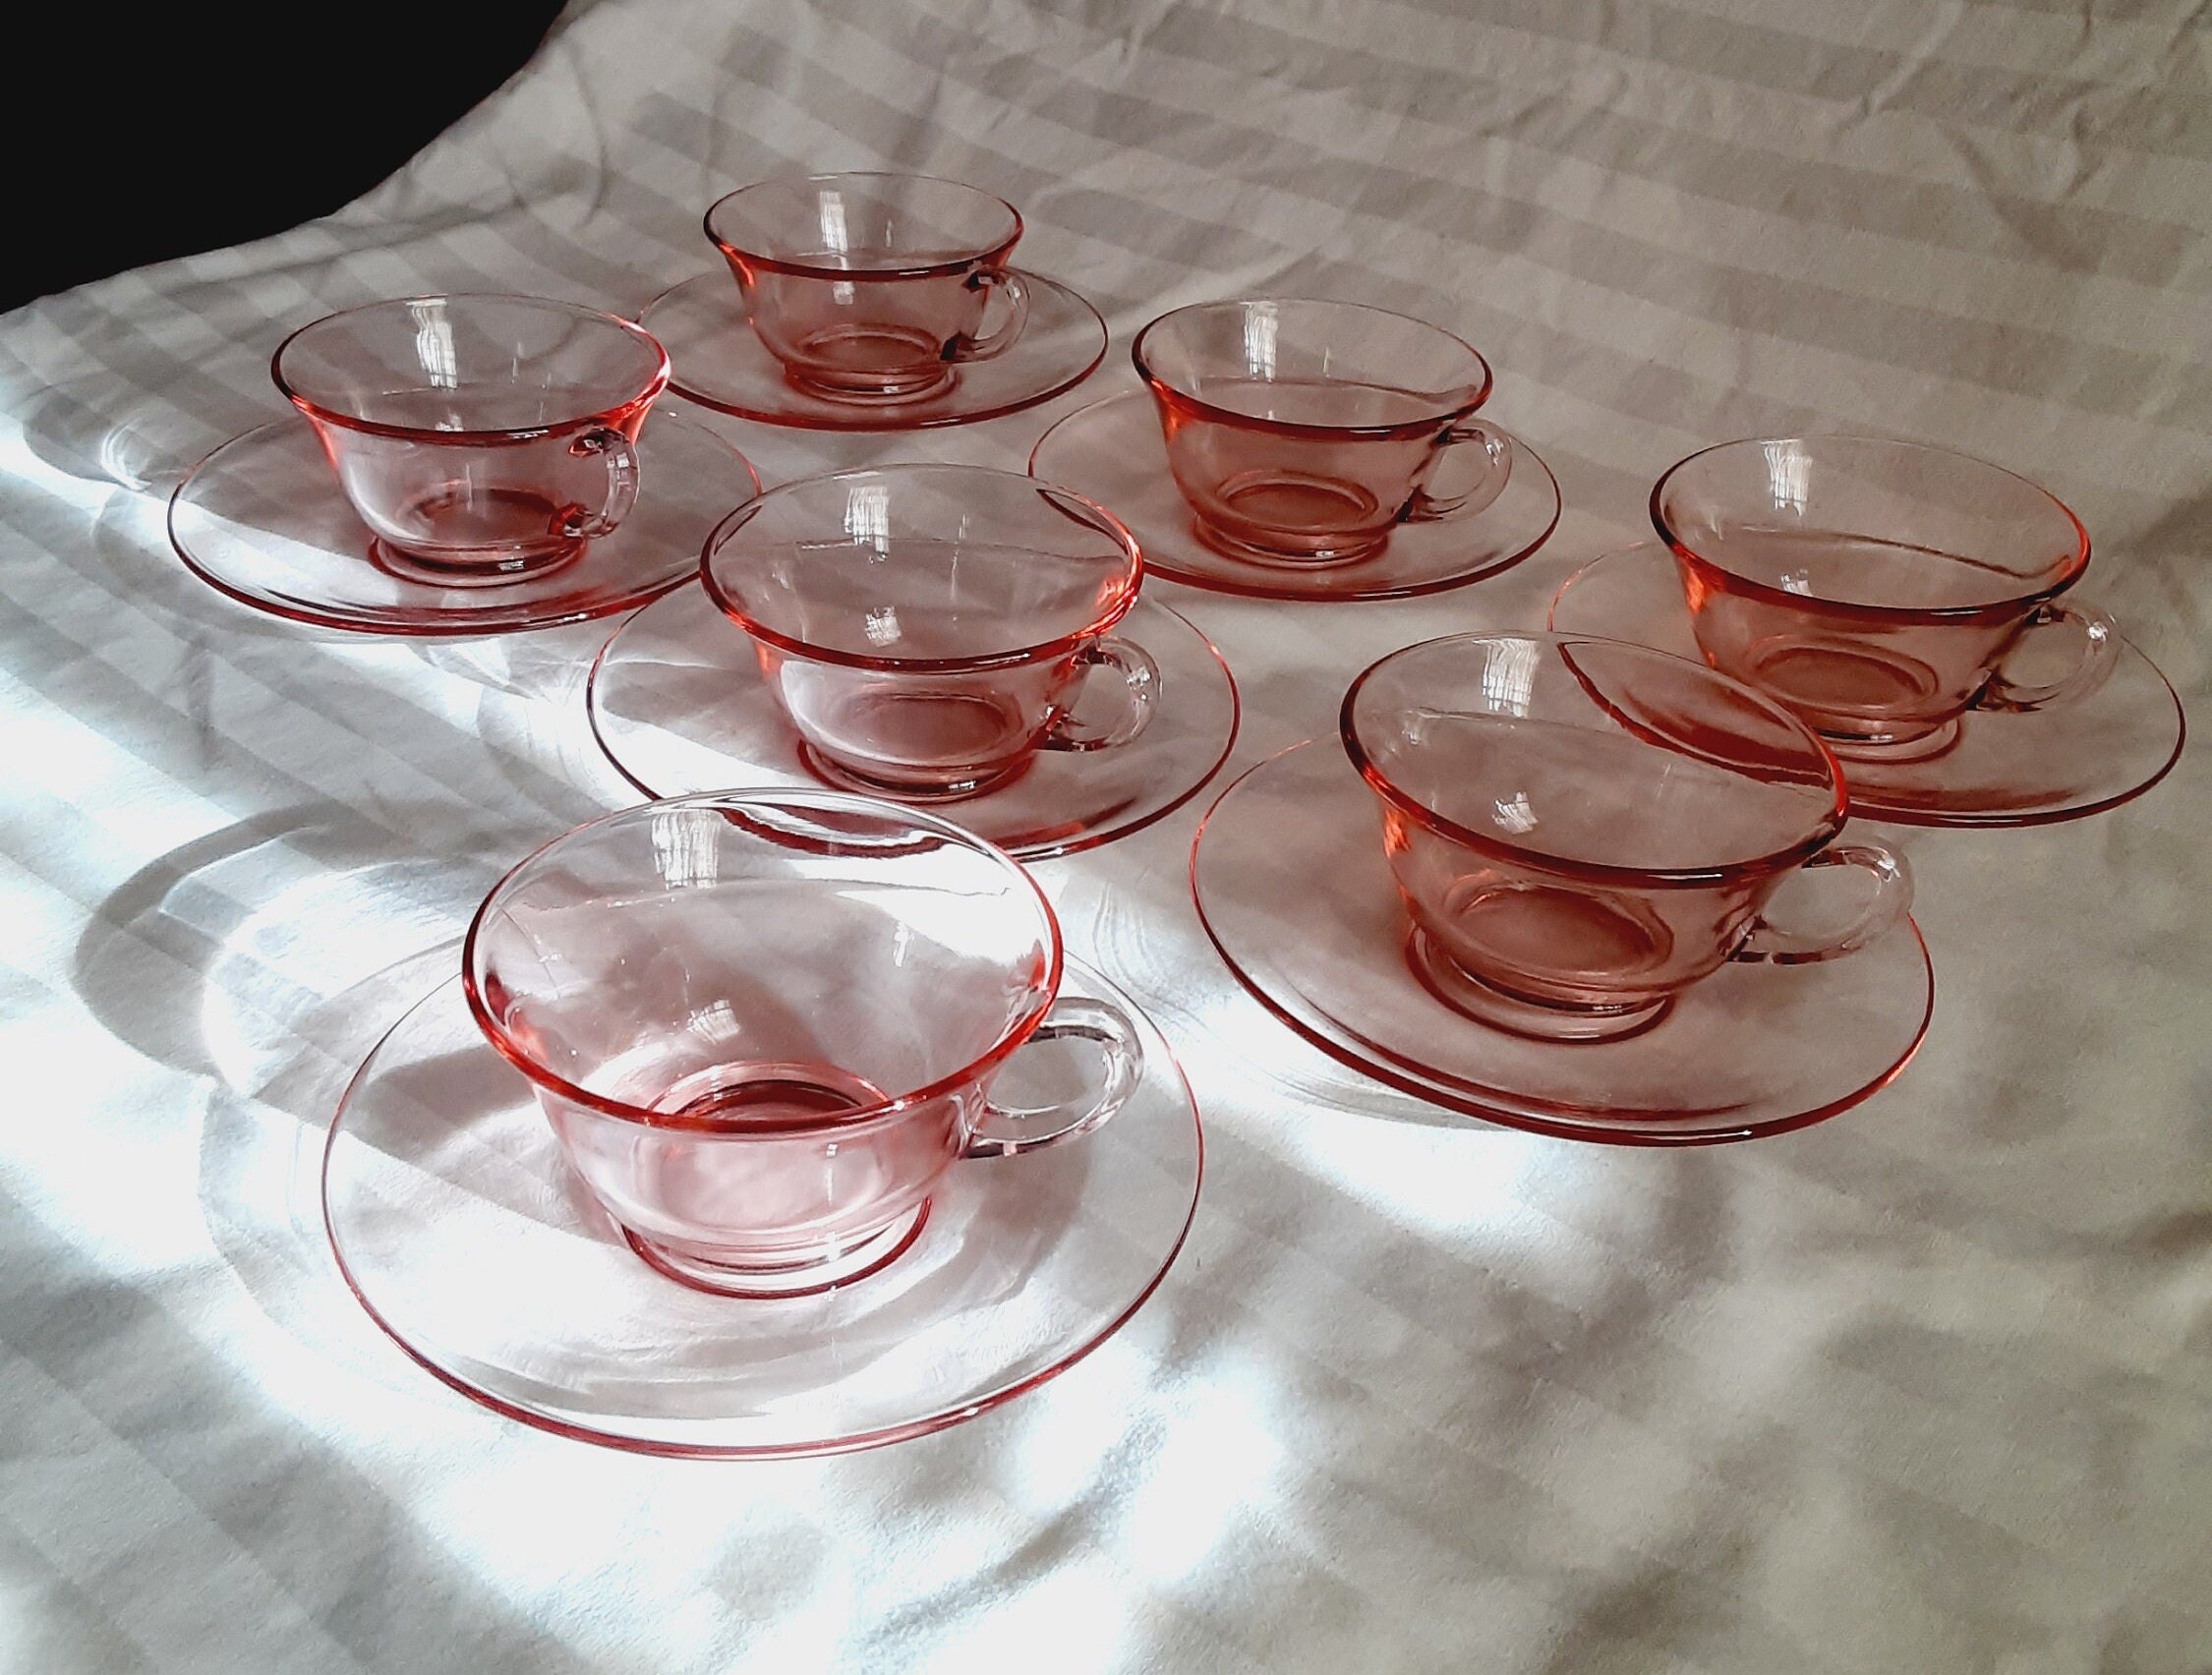 cosnou Vintage Glass Tea Cups with Saucers, Glass Mugs 7 Oz Set of 6  Espresso Coffee Embossed Glassw…See more cosnou Vintage Glass Tea Cups with